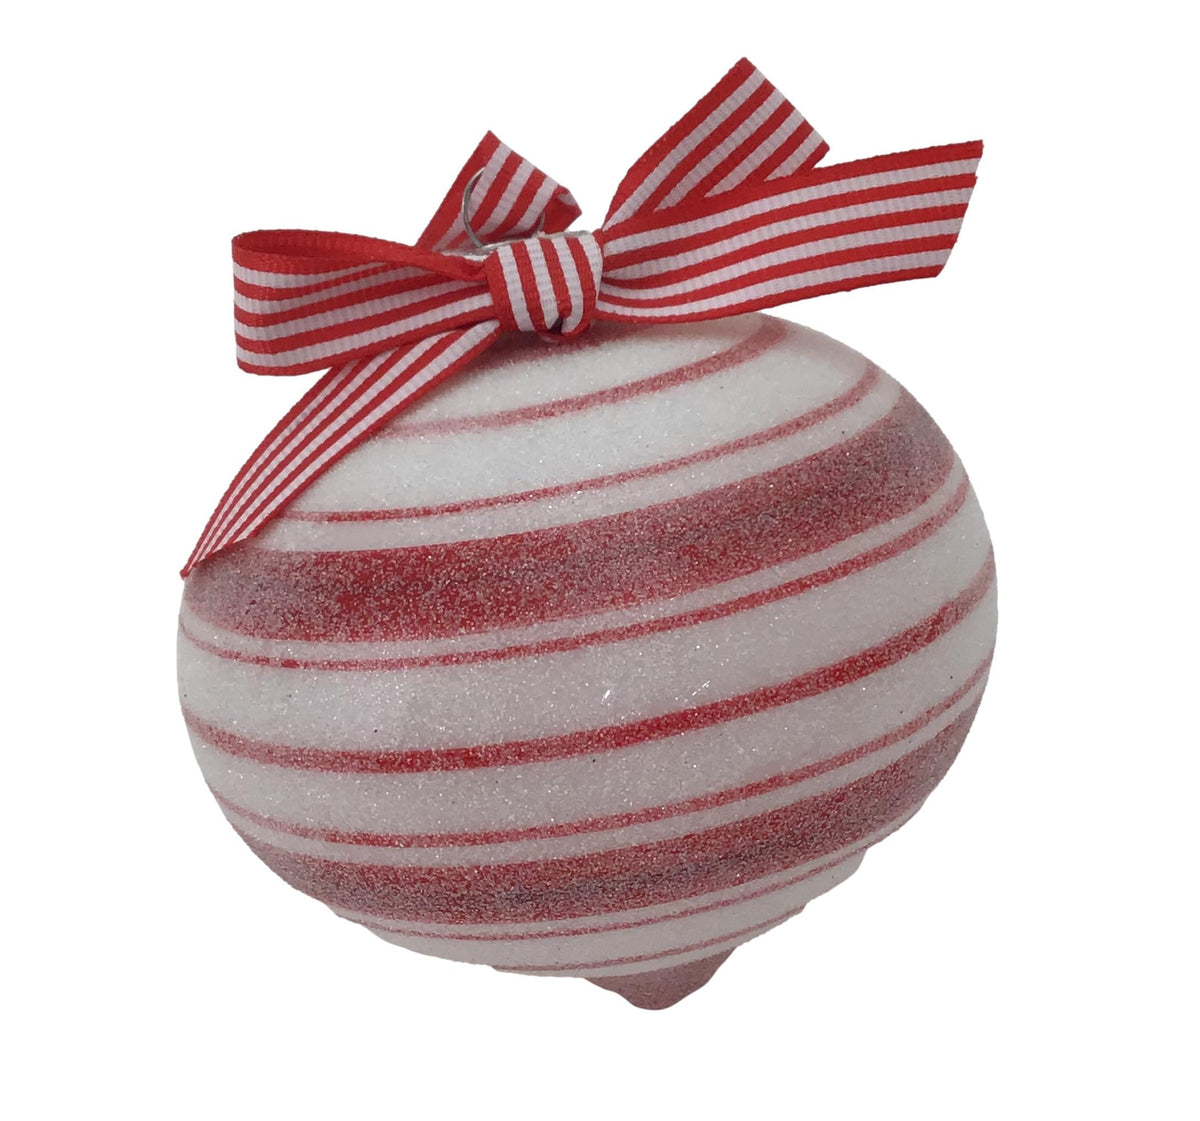 Red and White Onion Ornament, 10cm - My Christmas